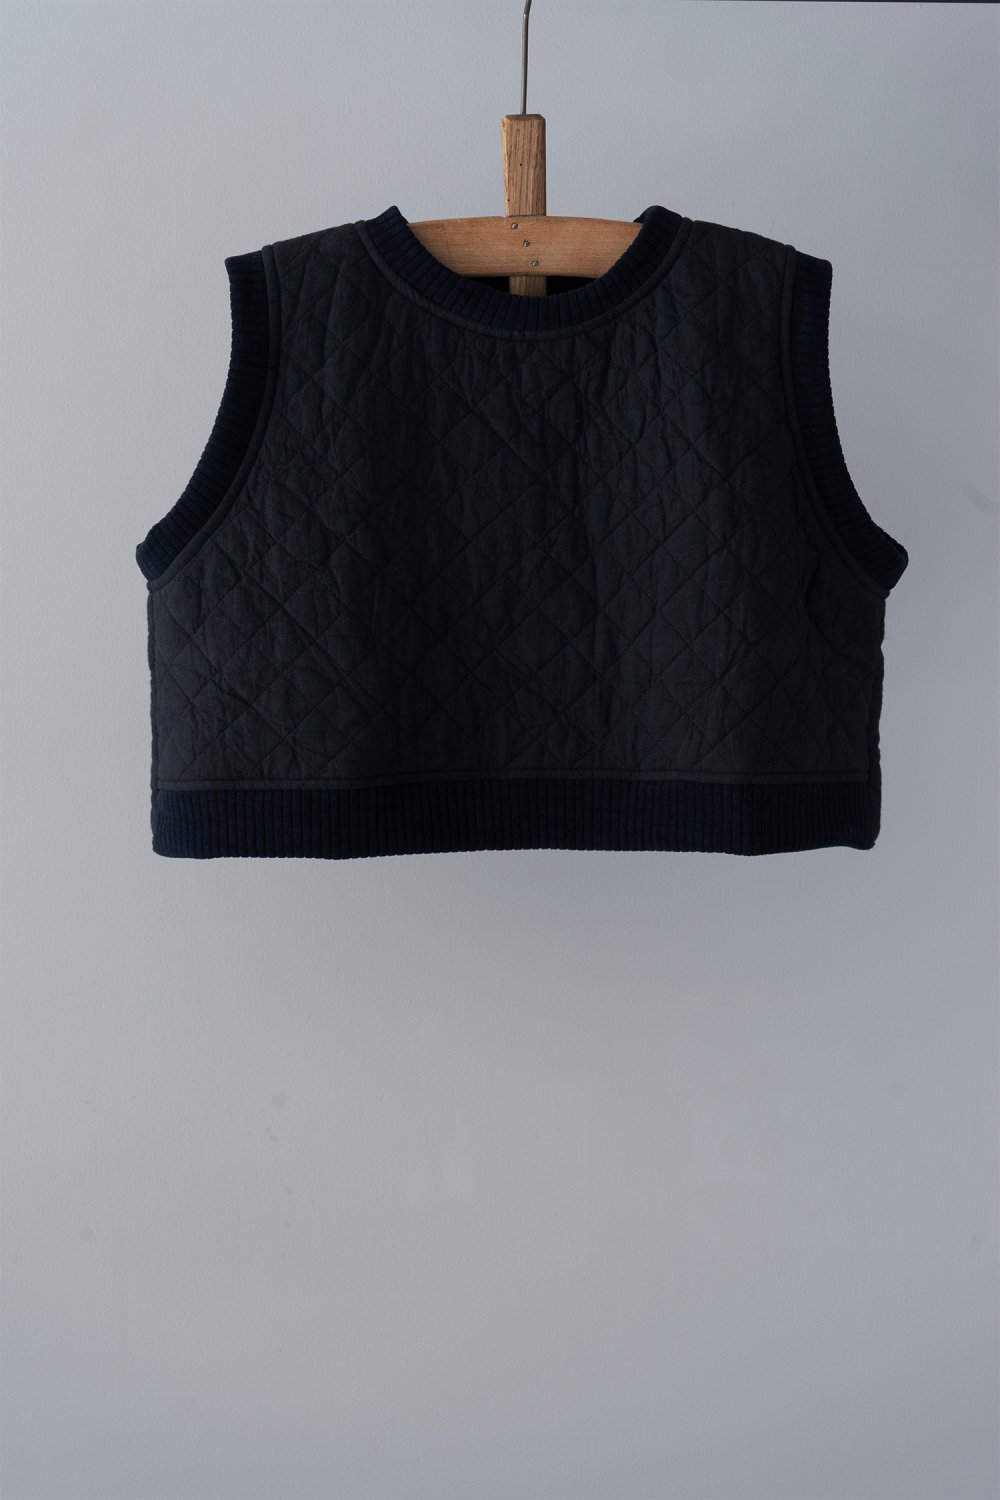 michirico Cotton Quilted Gilet ( Inc-Black )